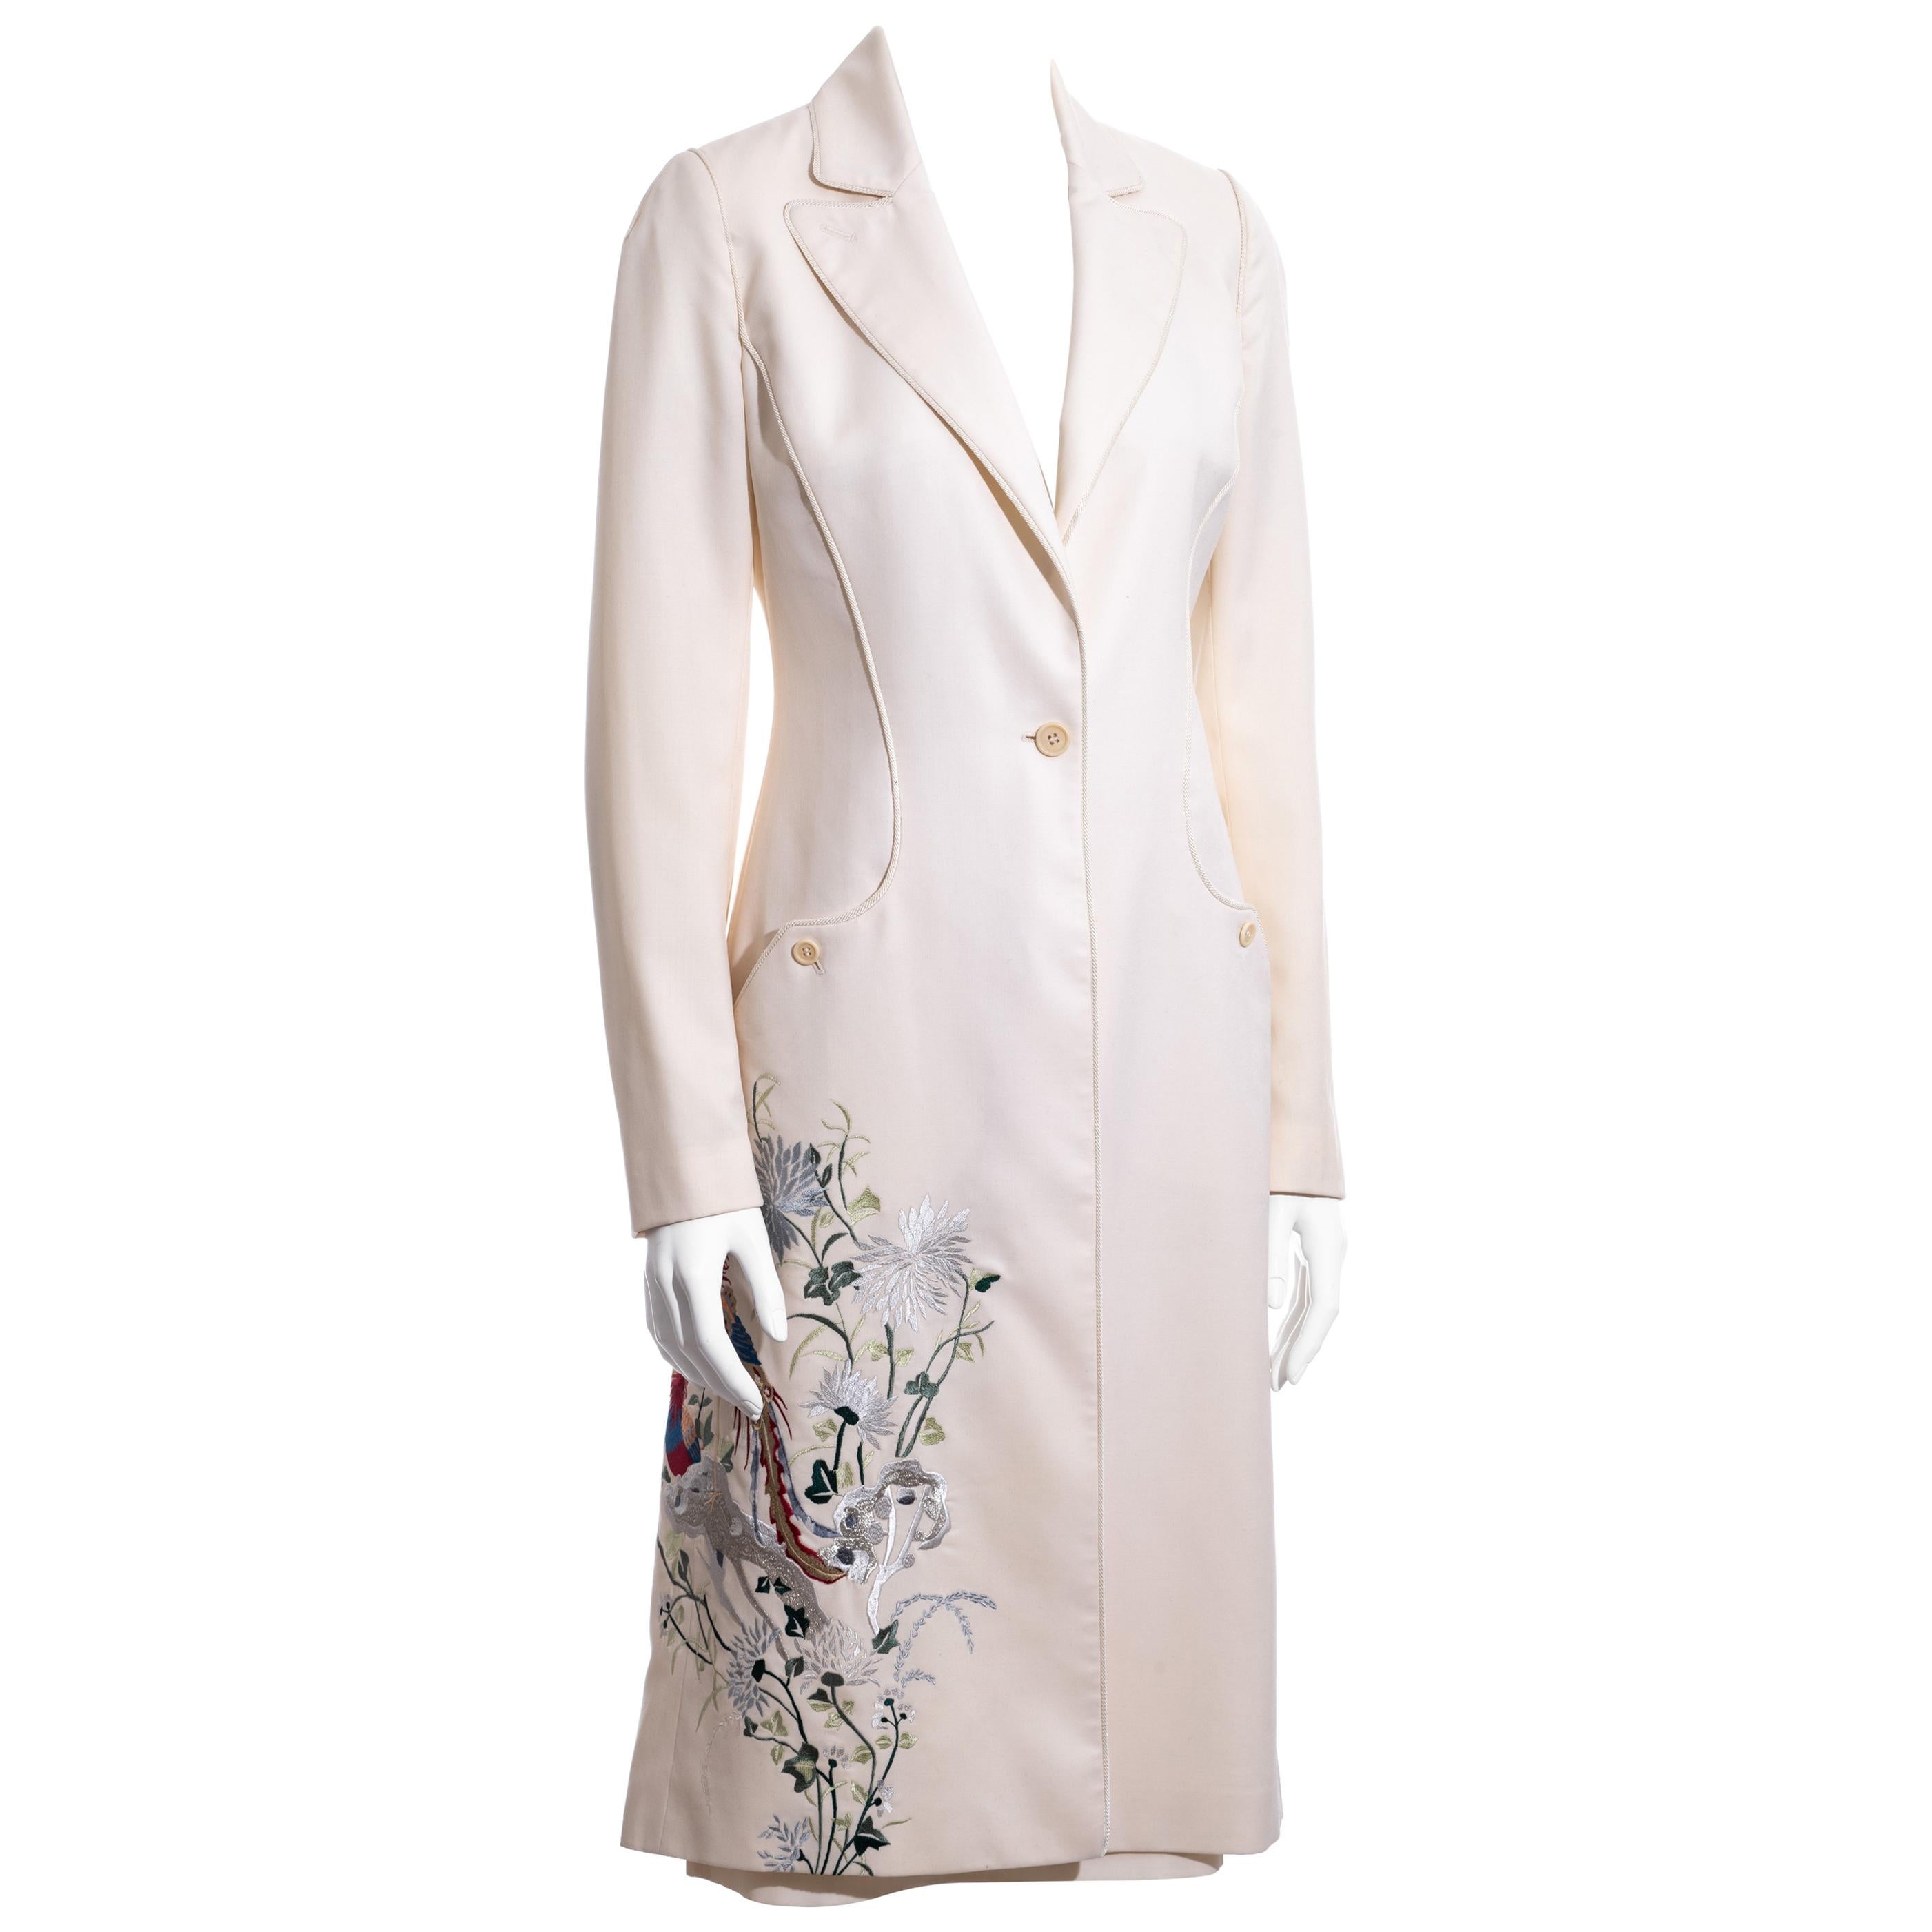 Alexander McQueen ivory wool embroidered skirt suit, c. 1997-1999